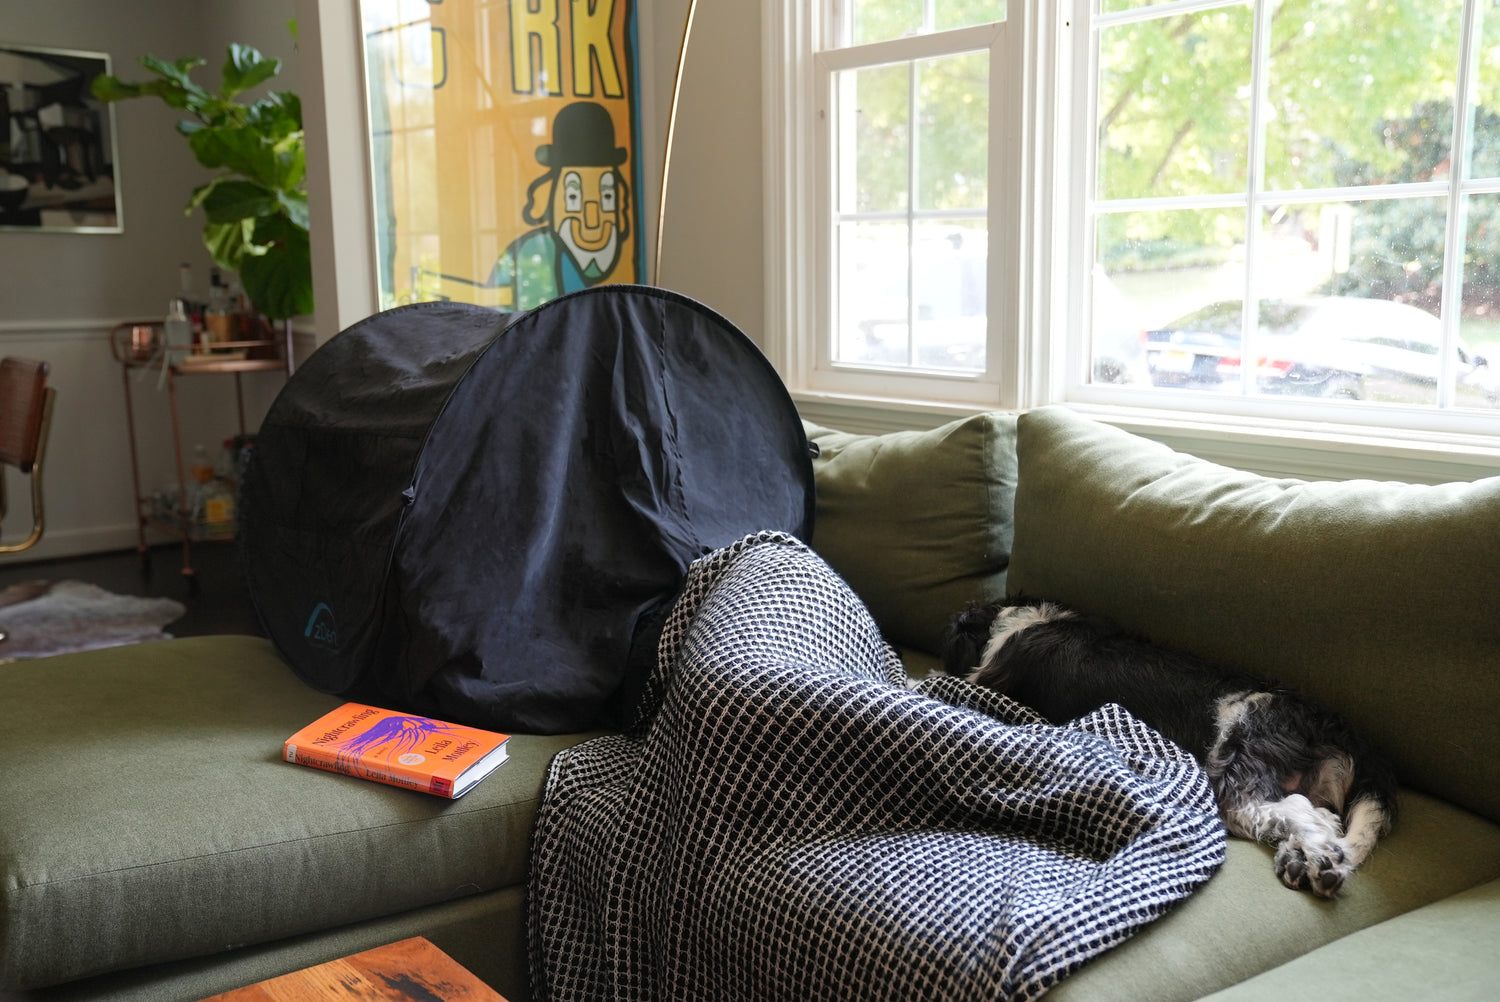 zDen allows you are to sleep anytime, anywhere like Katherine and her pup taking a power nap during the day